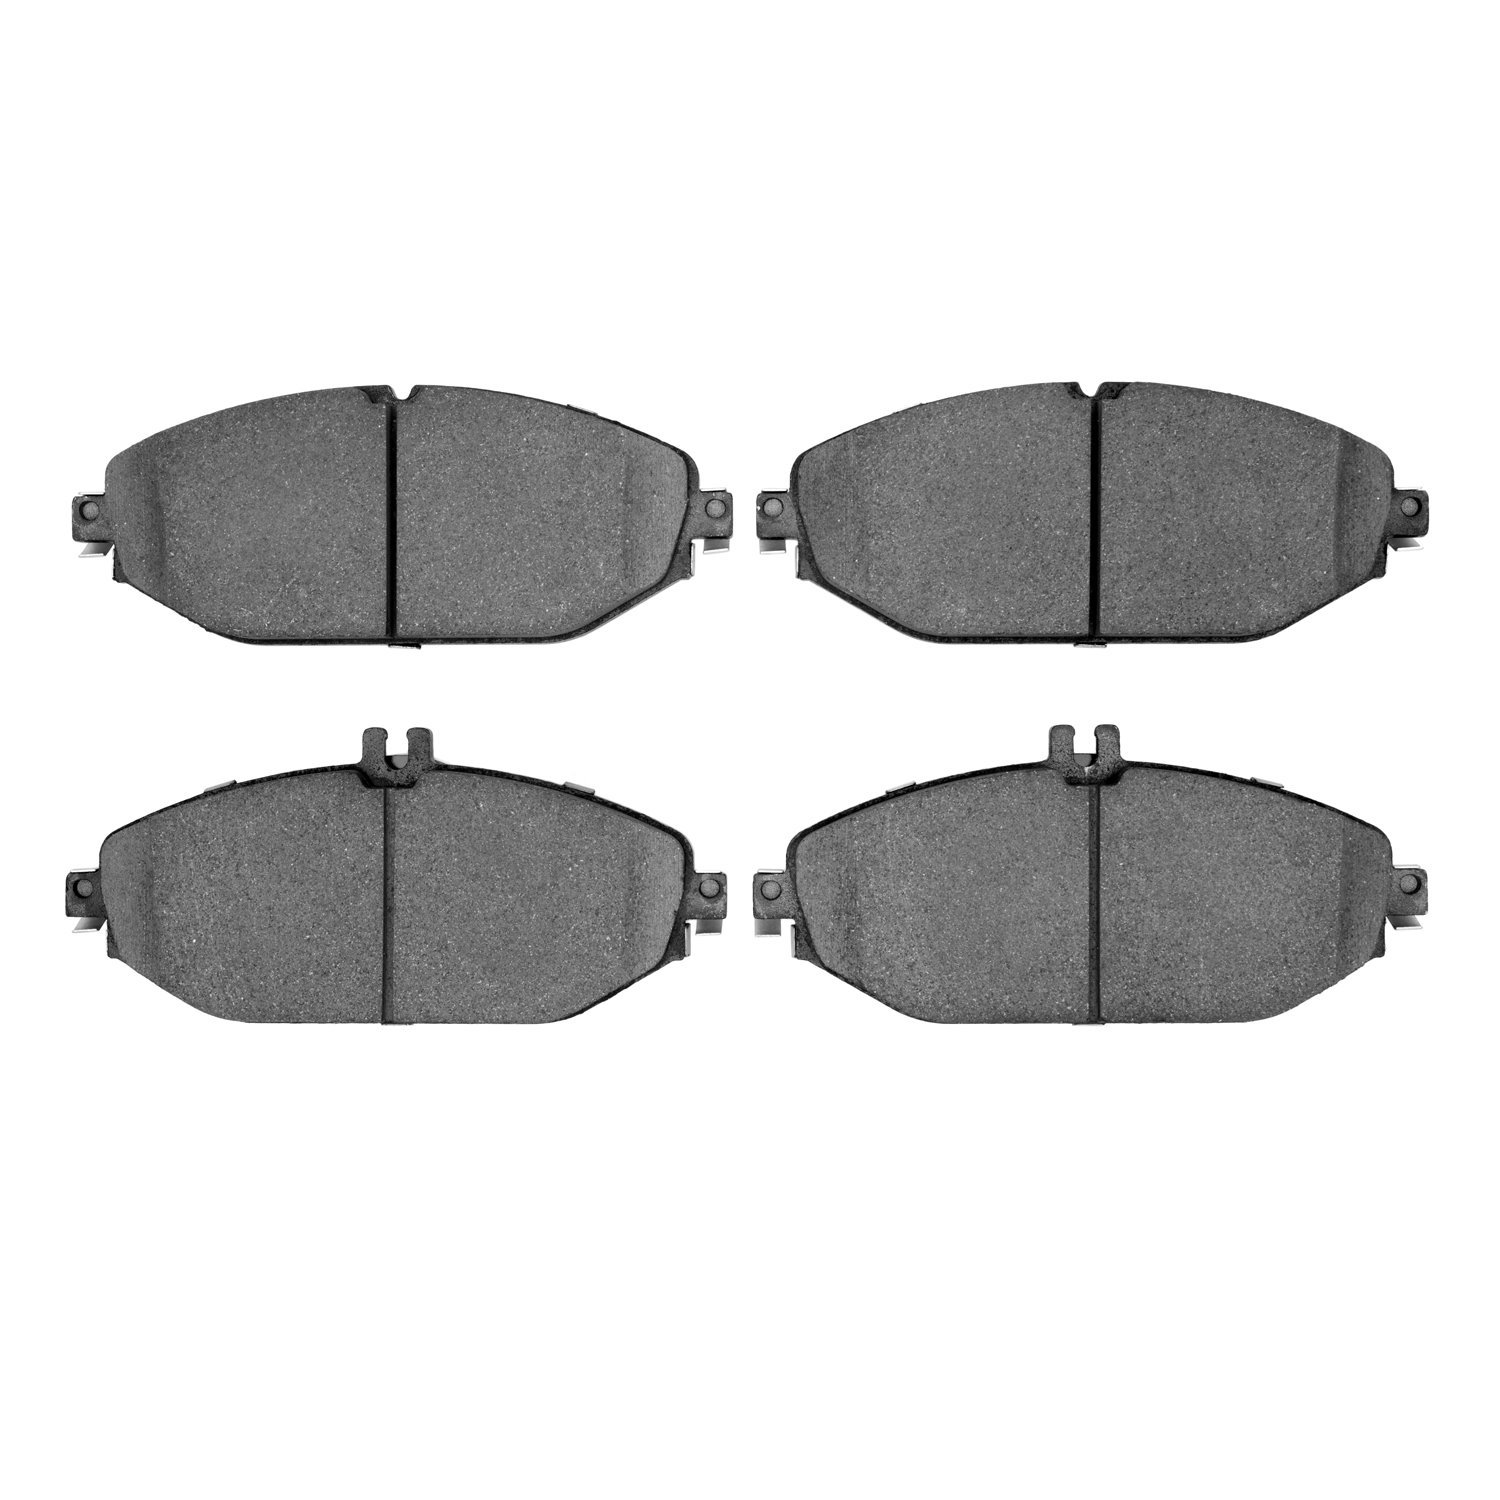 1310-1794-00 3000-Series Ceramic Brake Pads, Fits Select Mercedes-Benz, Position: Front